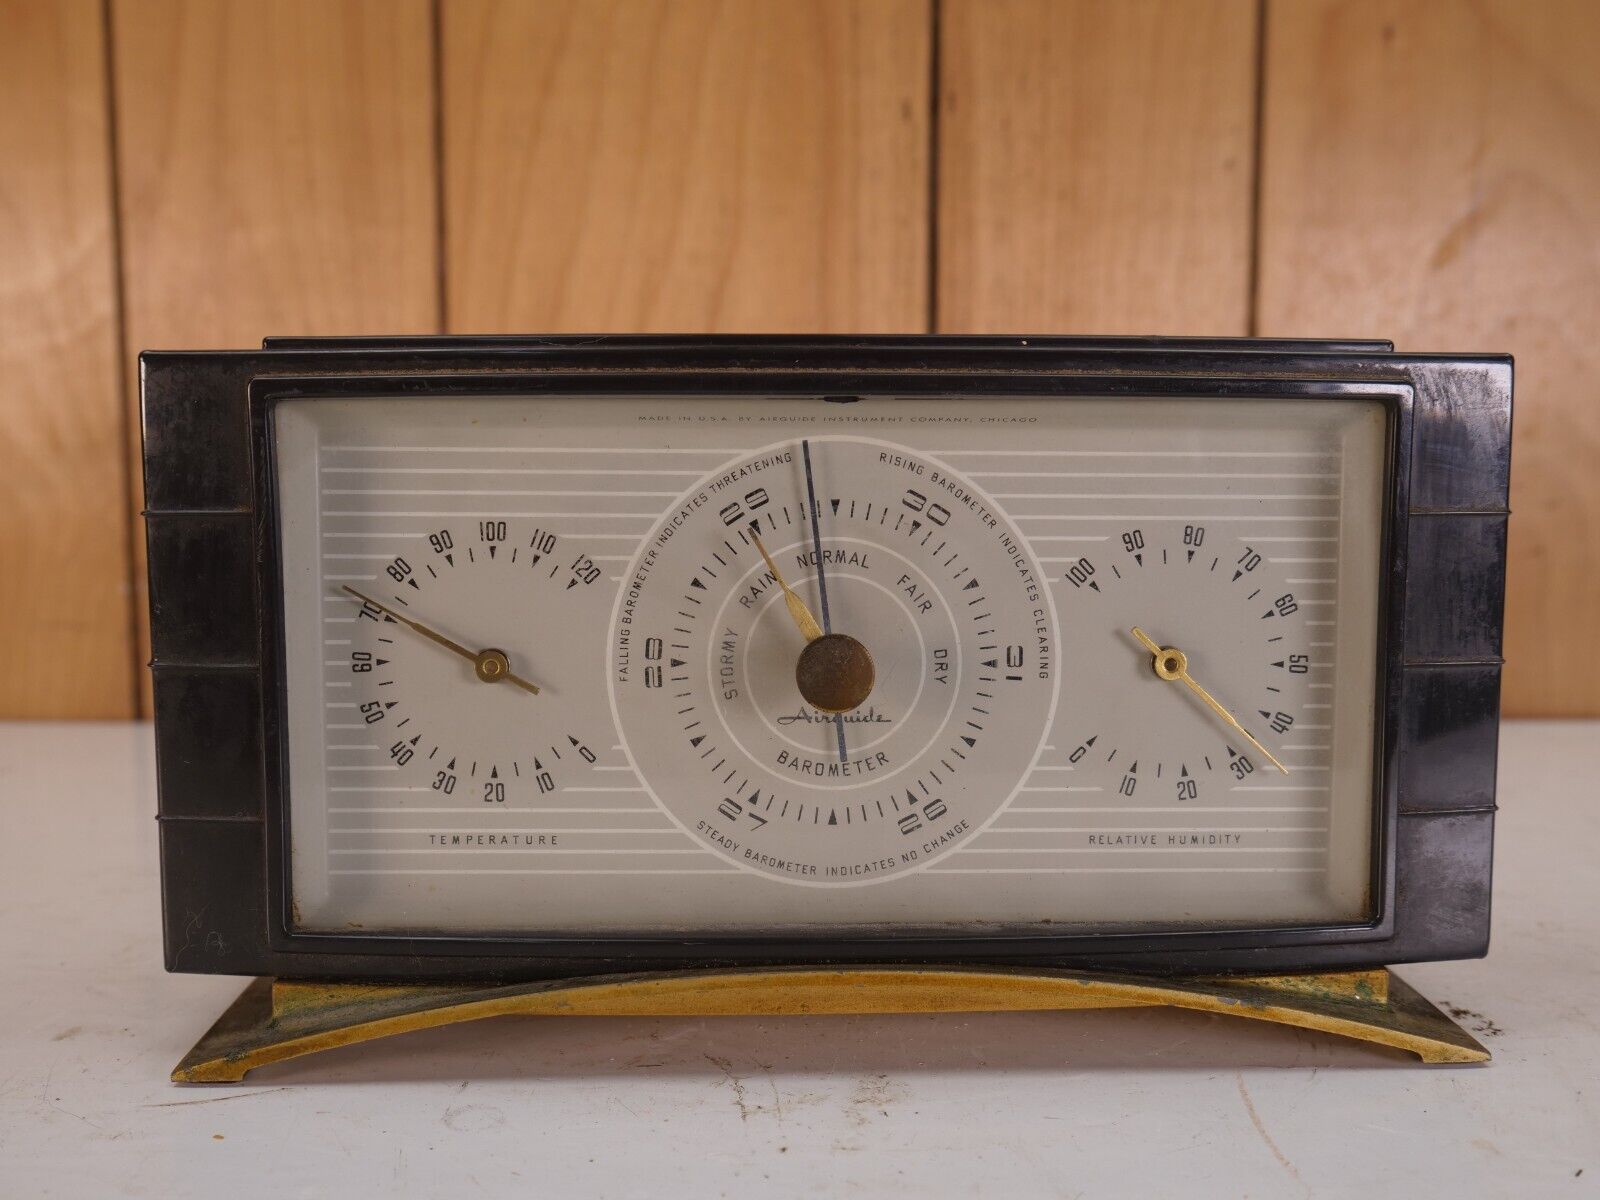 Vintage Airguide Instrument Chicago Company - Temperature, Barometer, Humidity